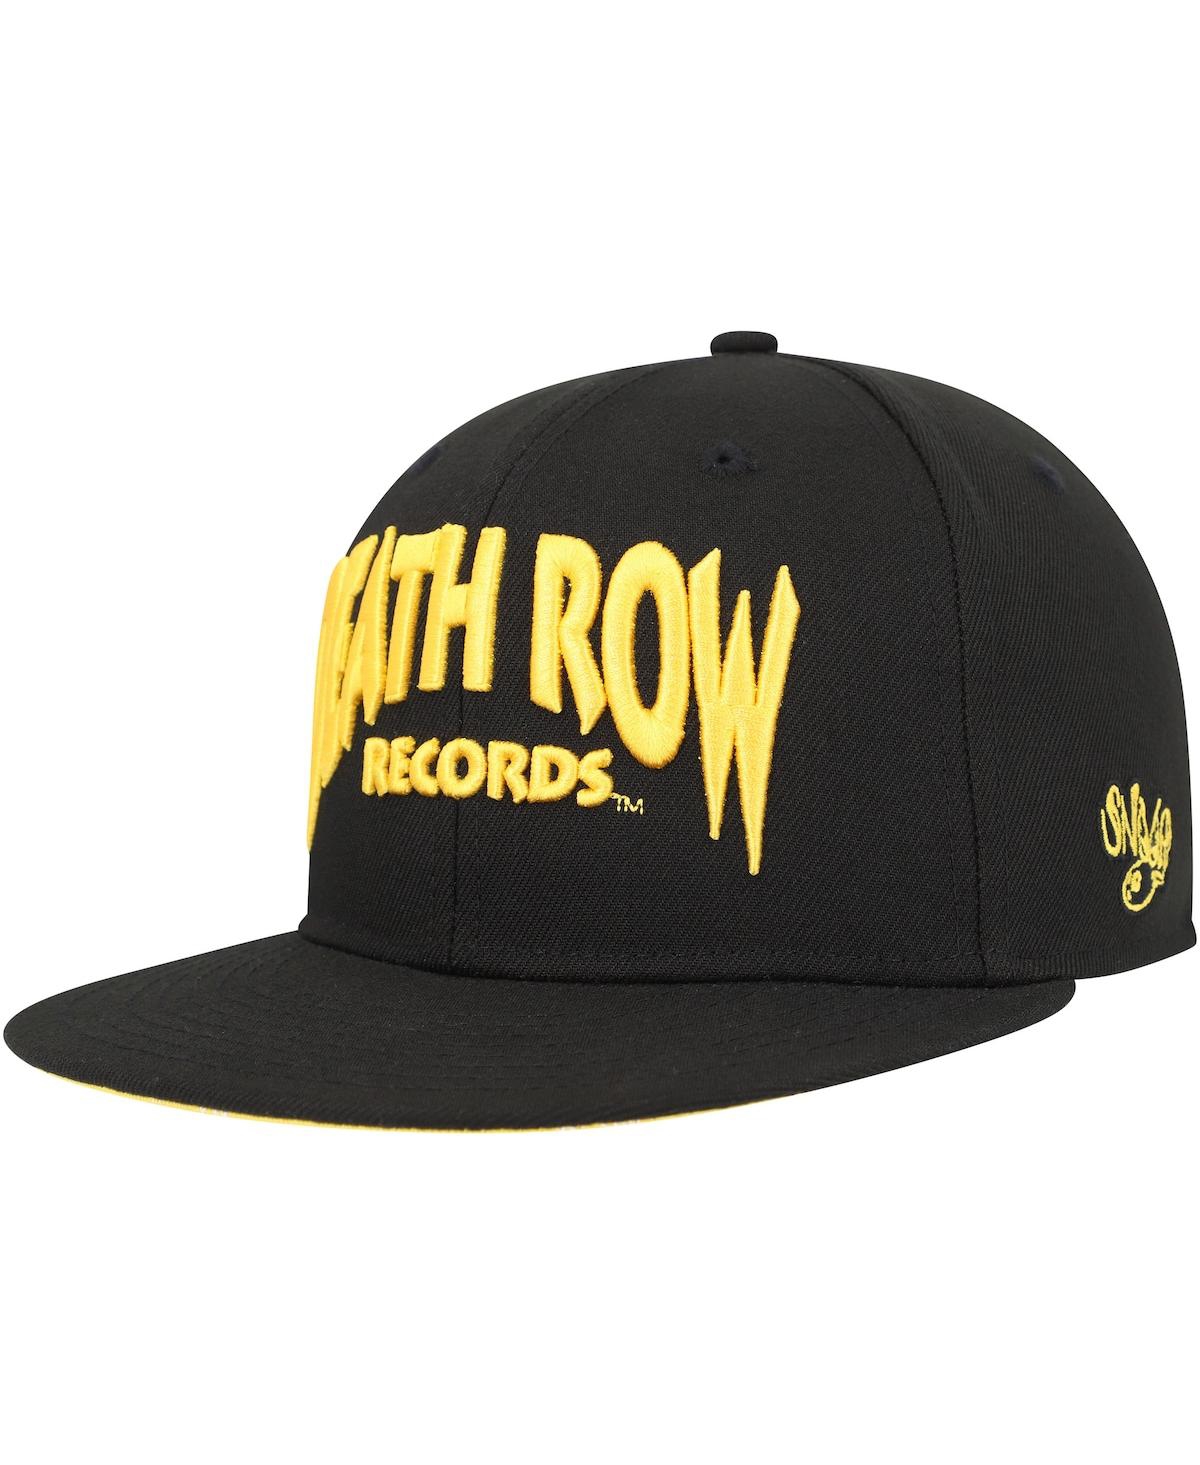 Men's Black Death Row Records Paisley Fitted Hat - Black